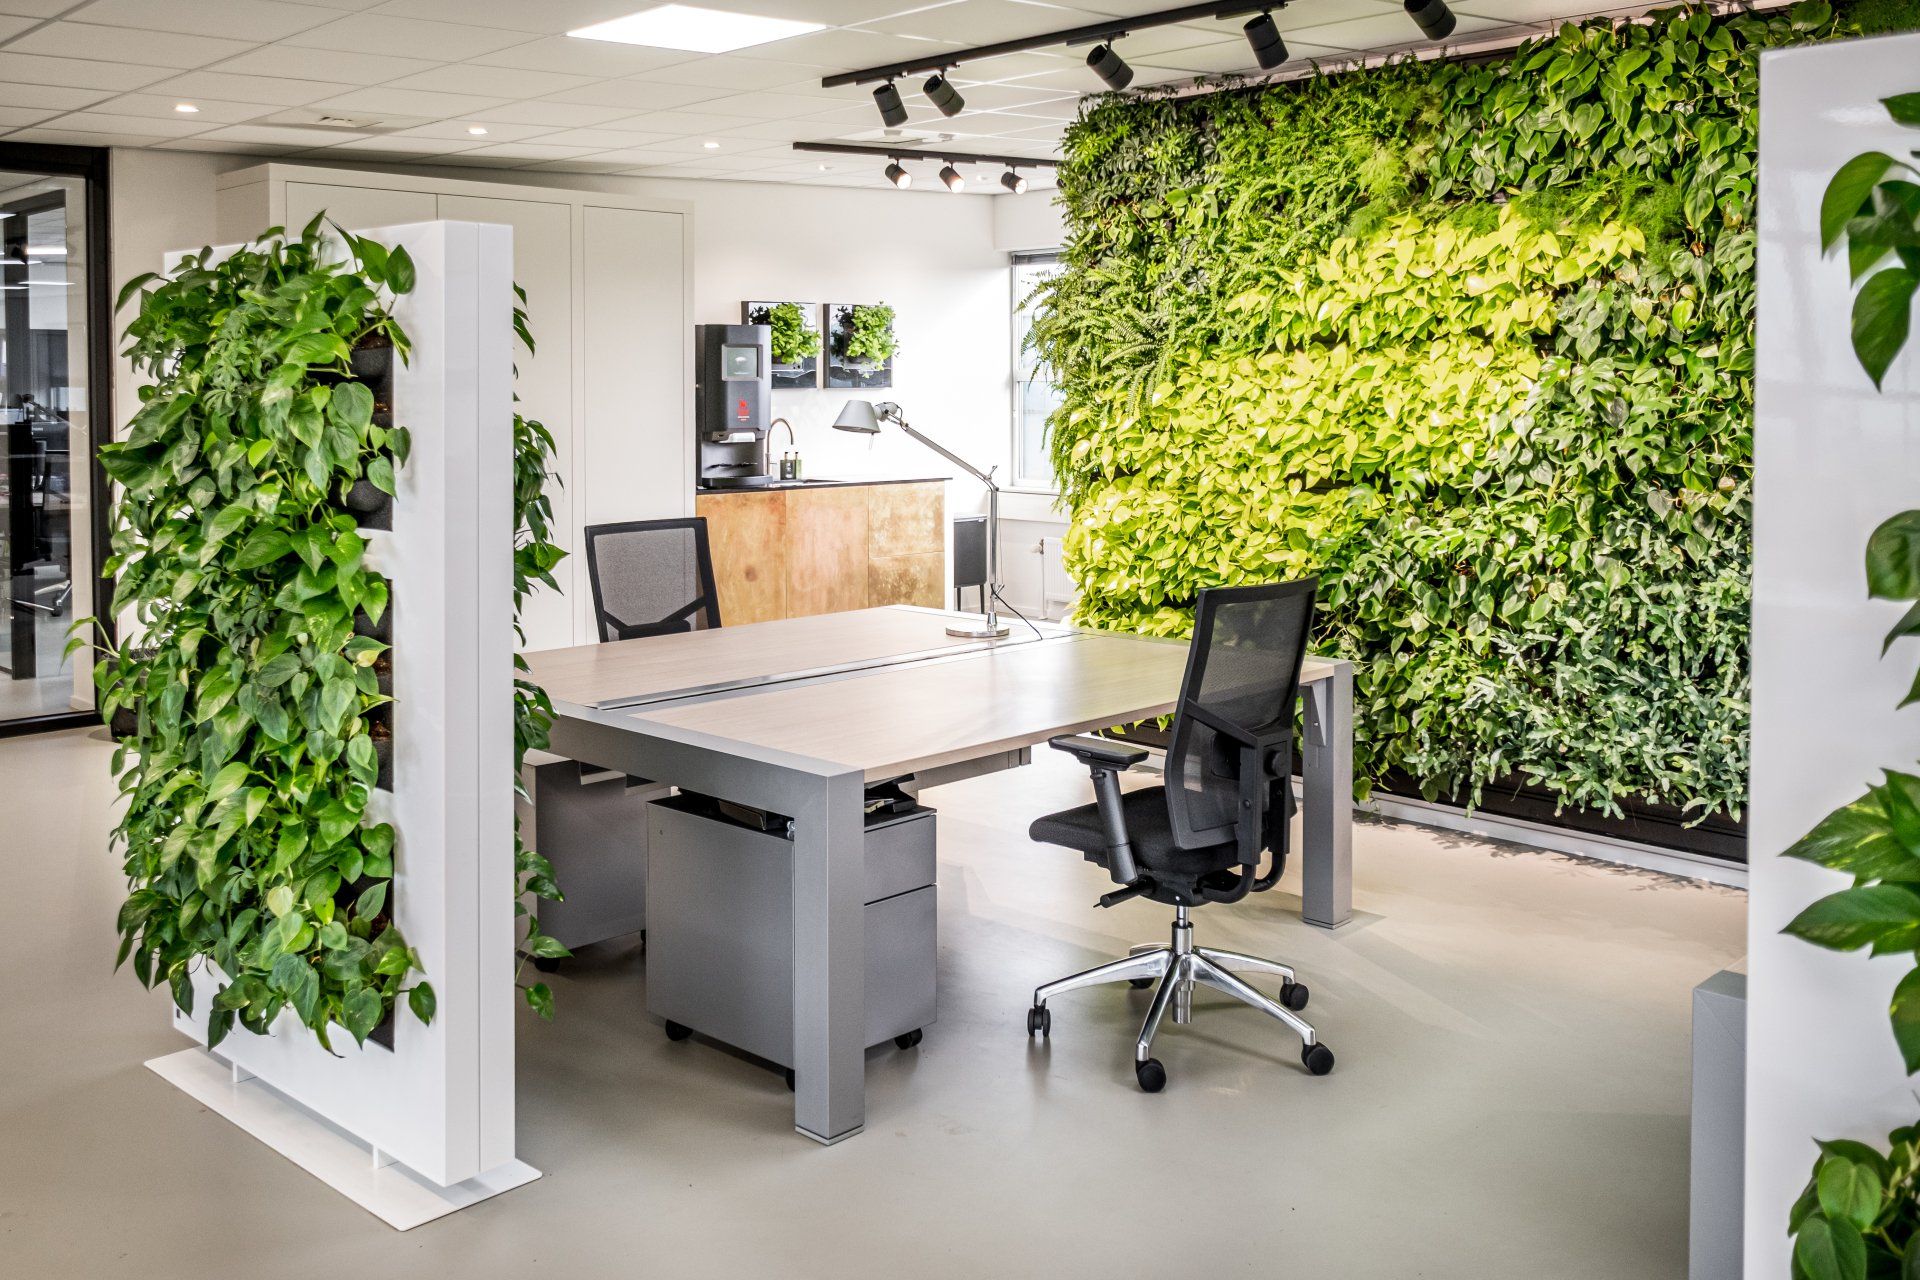 Showing and installtion of an internal livedivider and living wall in an office setting